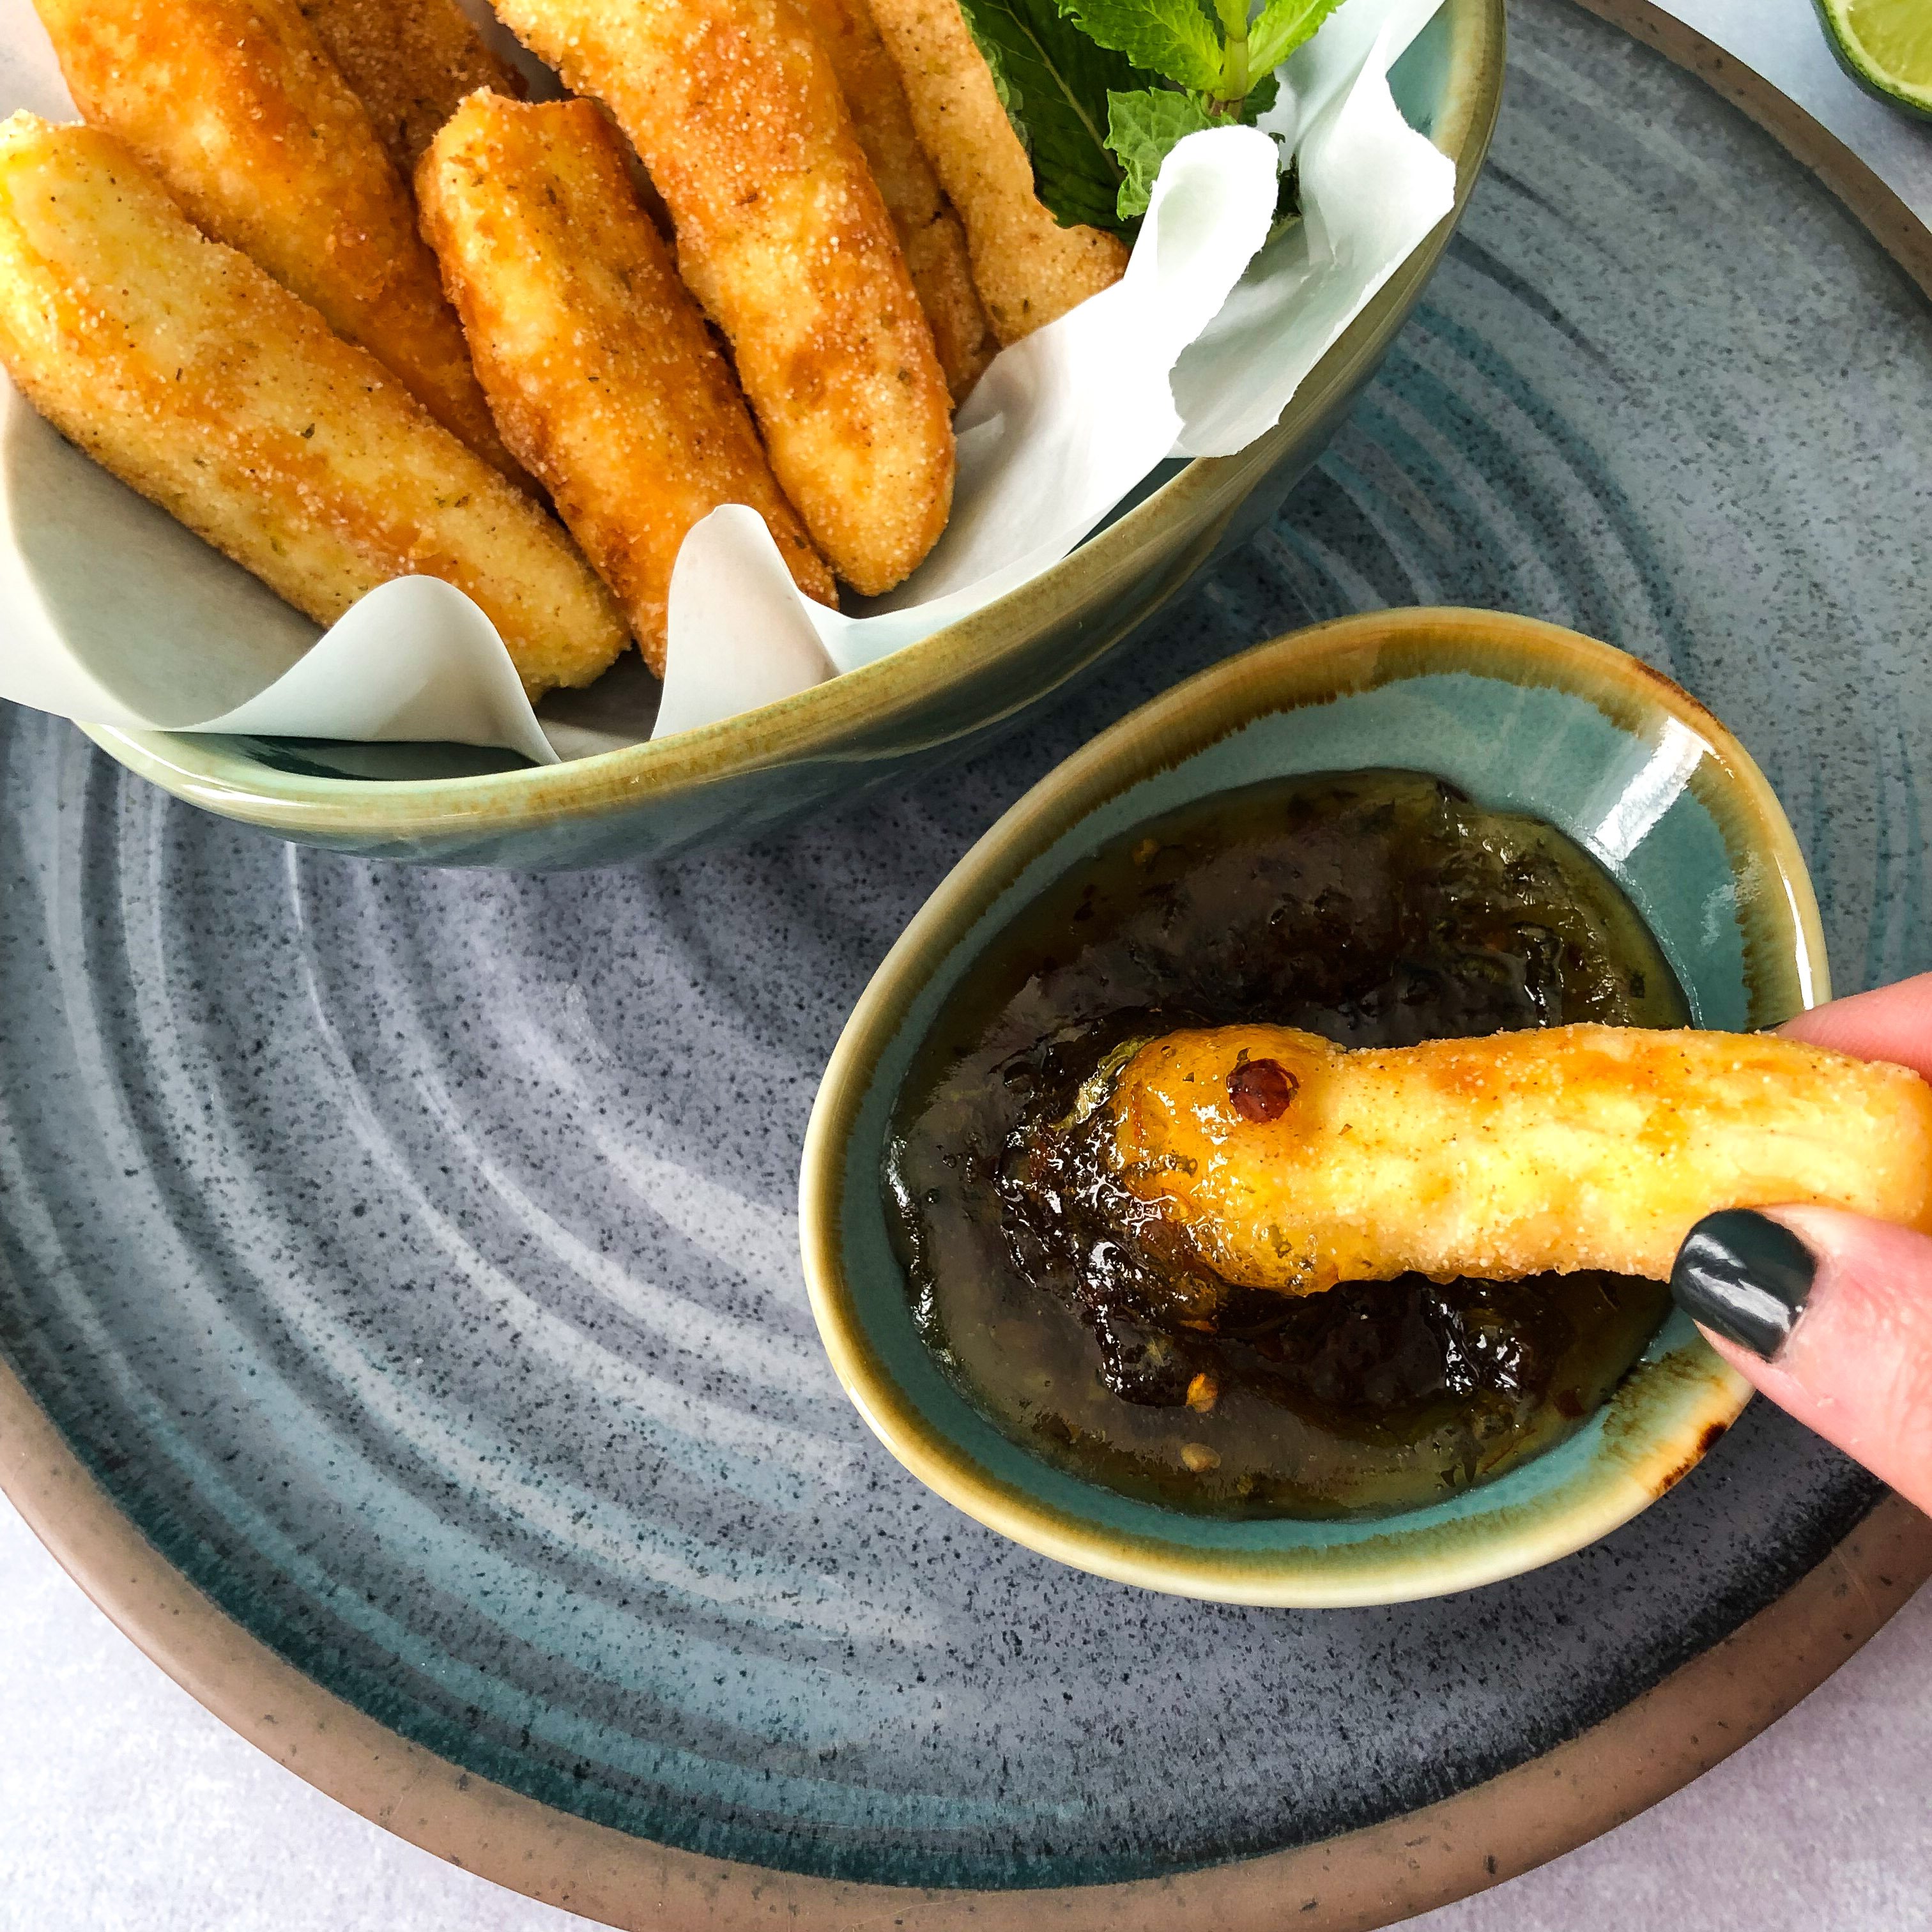 Halloumi fries with a citrus lime mint dipping sauce